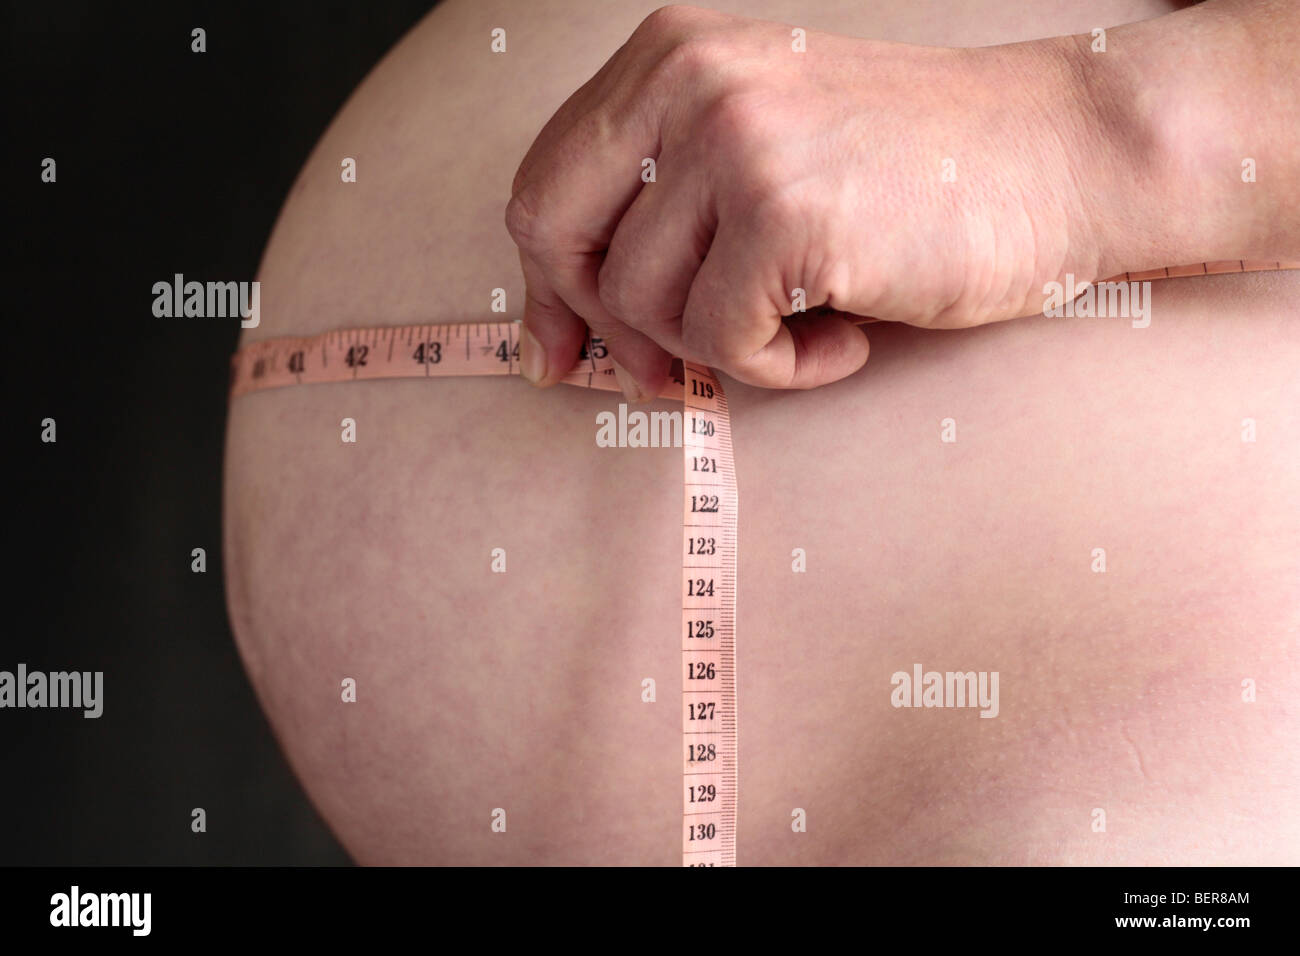 Tape measure around the abdomen of an overweight male. Stock Photo